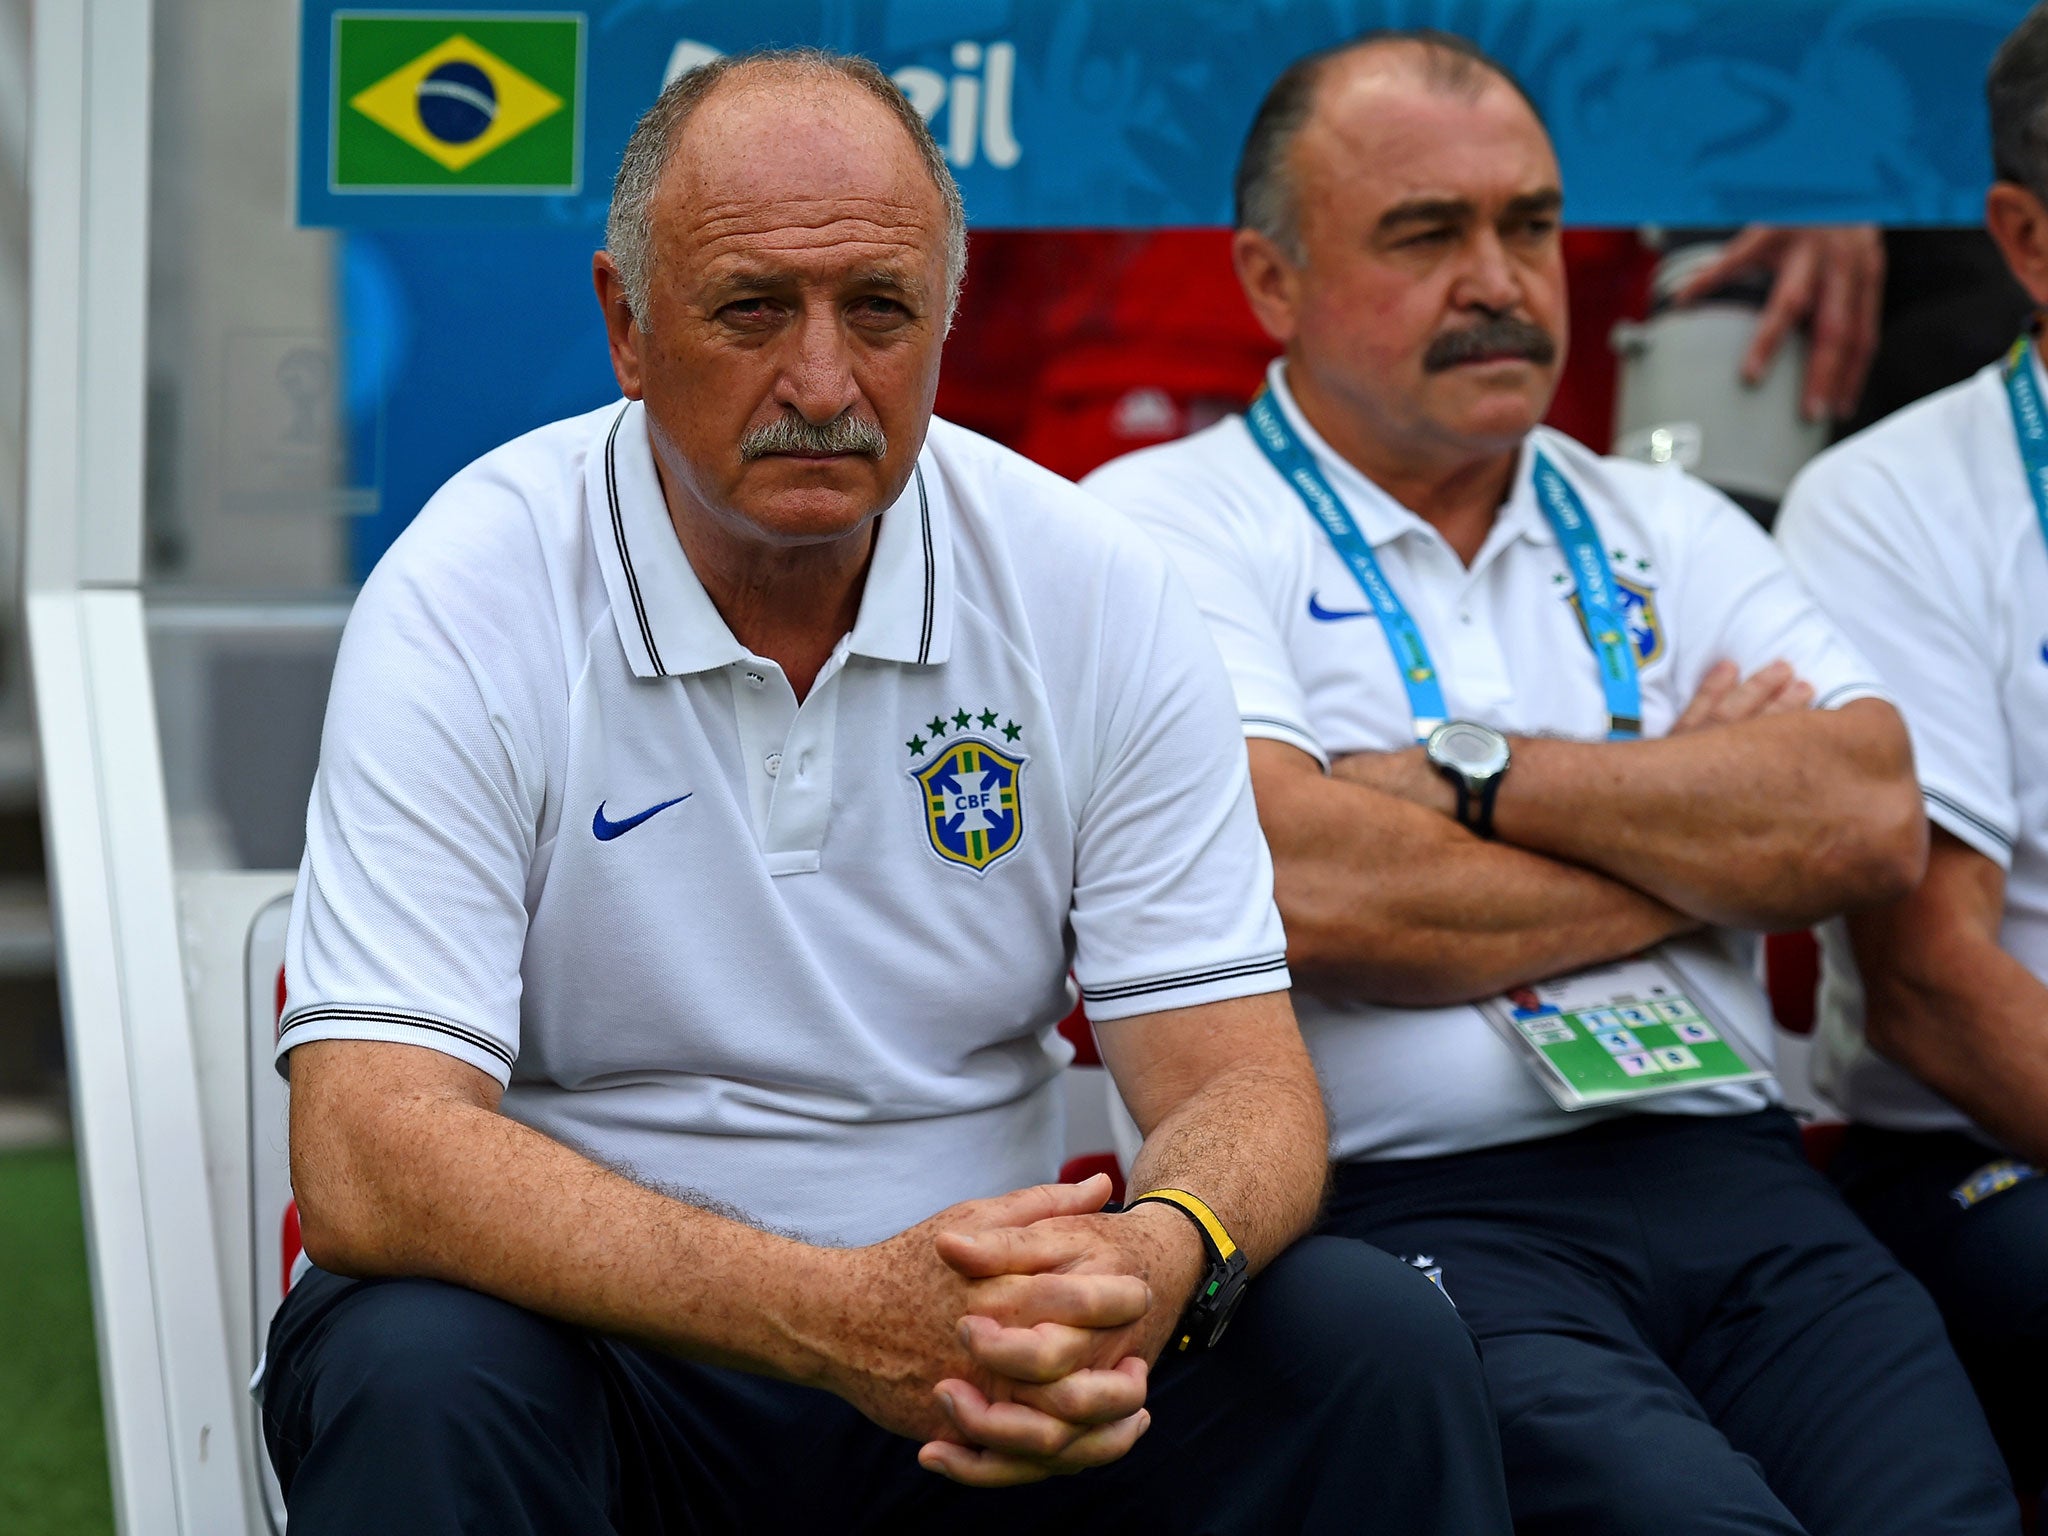 Head coach Luiz Felipe Scolari of Brazil looks on during the 2014 FIFA World Cup Brazil Group A match between Brazil and Mexico at Castelao